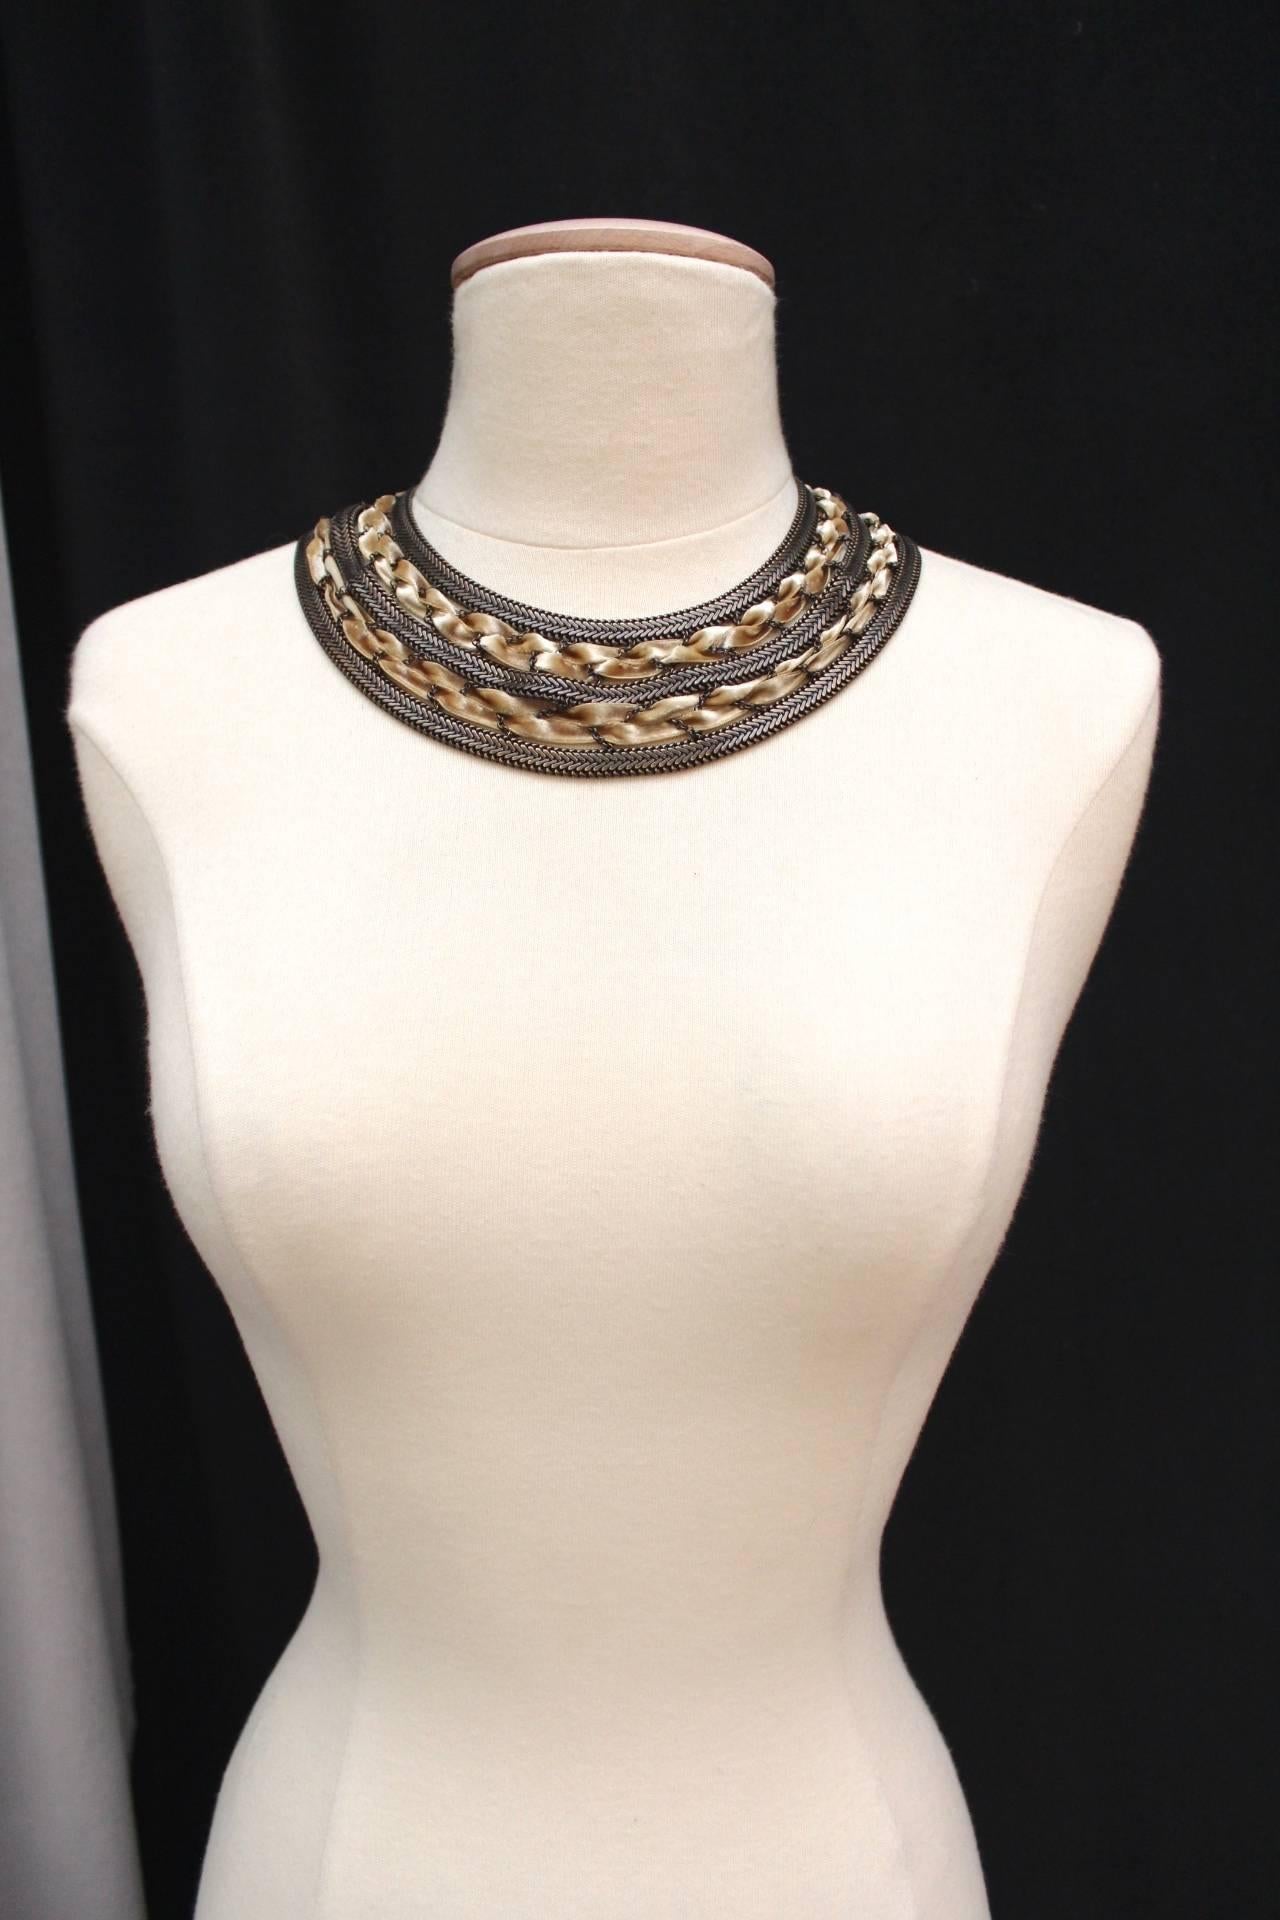 LOUIS VUITTON Short necklace composed of three strands of bronze colored metal interlaced with ivory color silk velvet ribbons braided with thin chains. 

The necklace fastens with a long metal stick, engraved LV. 

Dates from the 2000s.